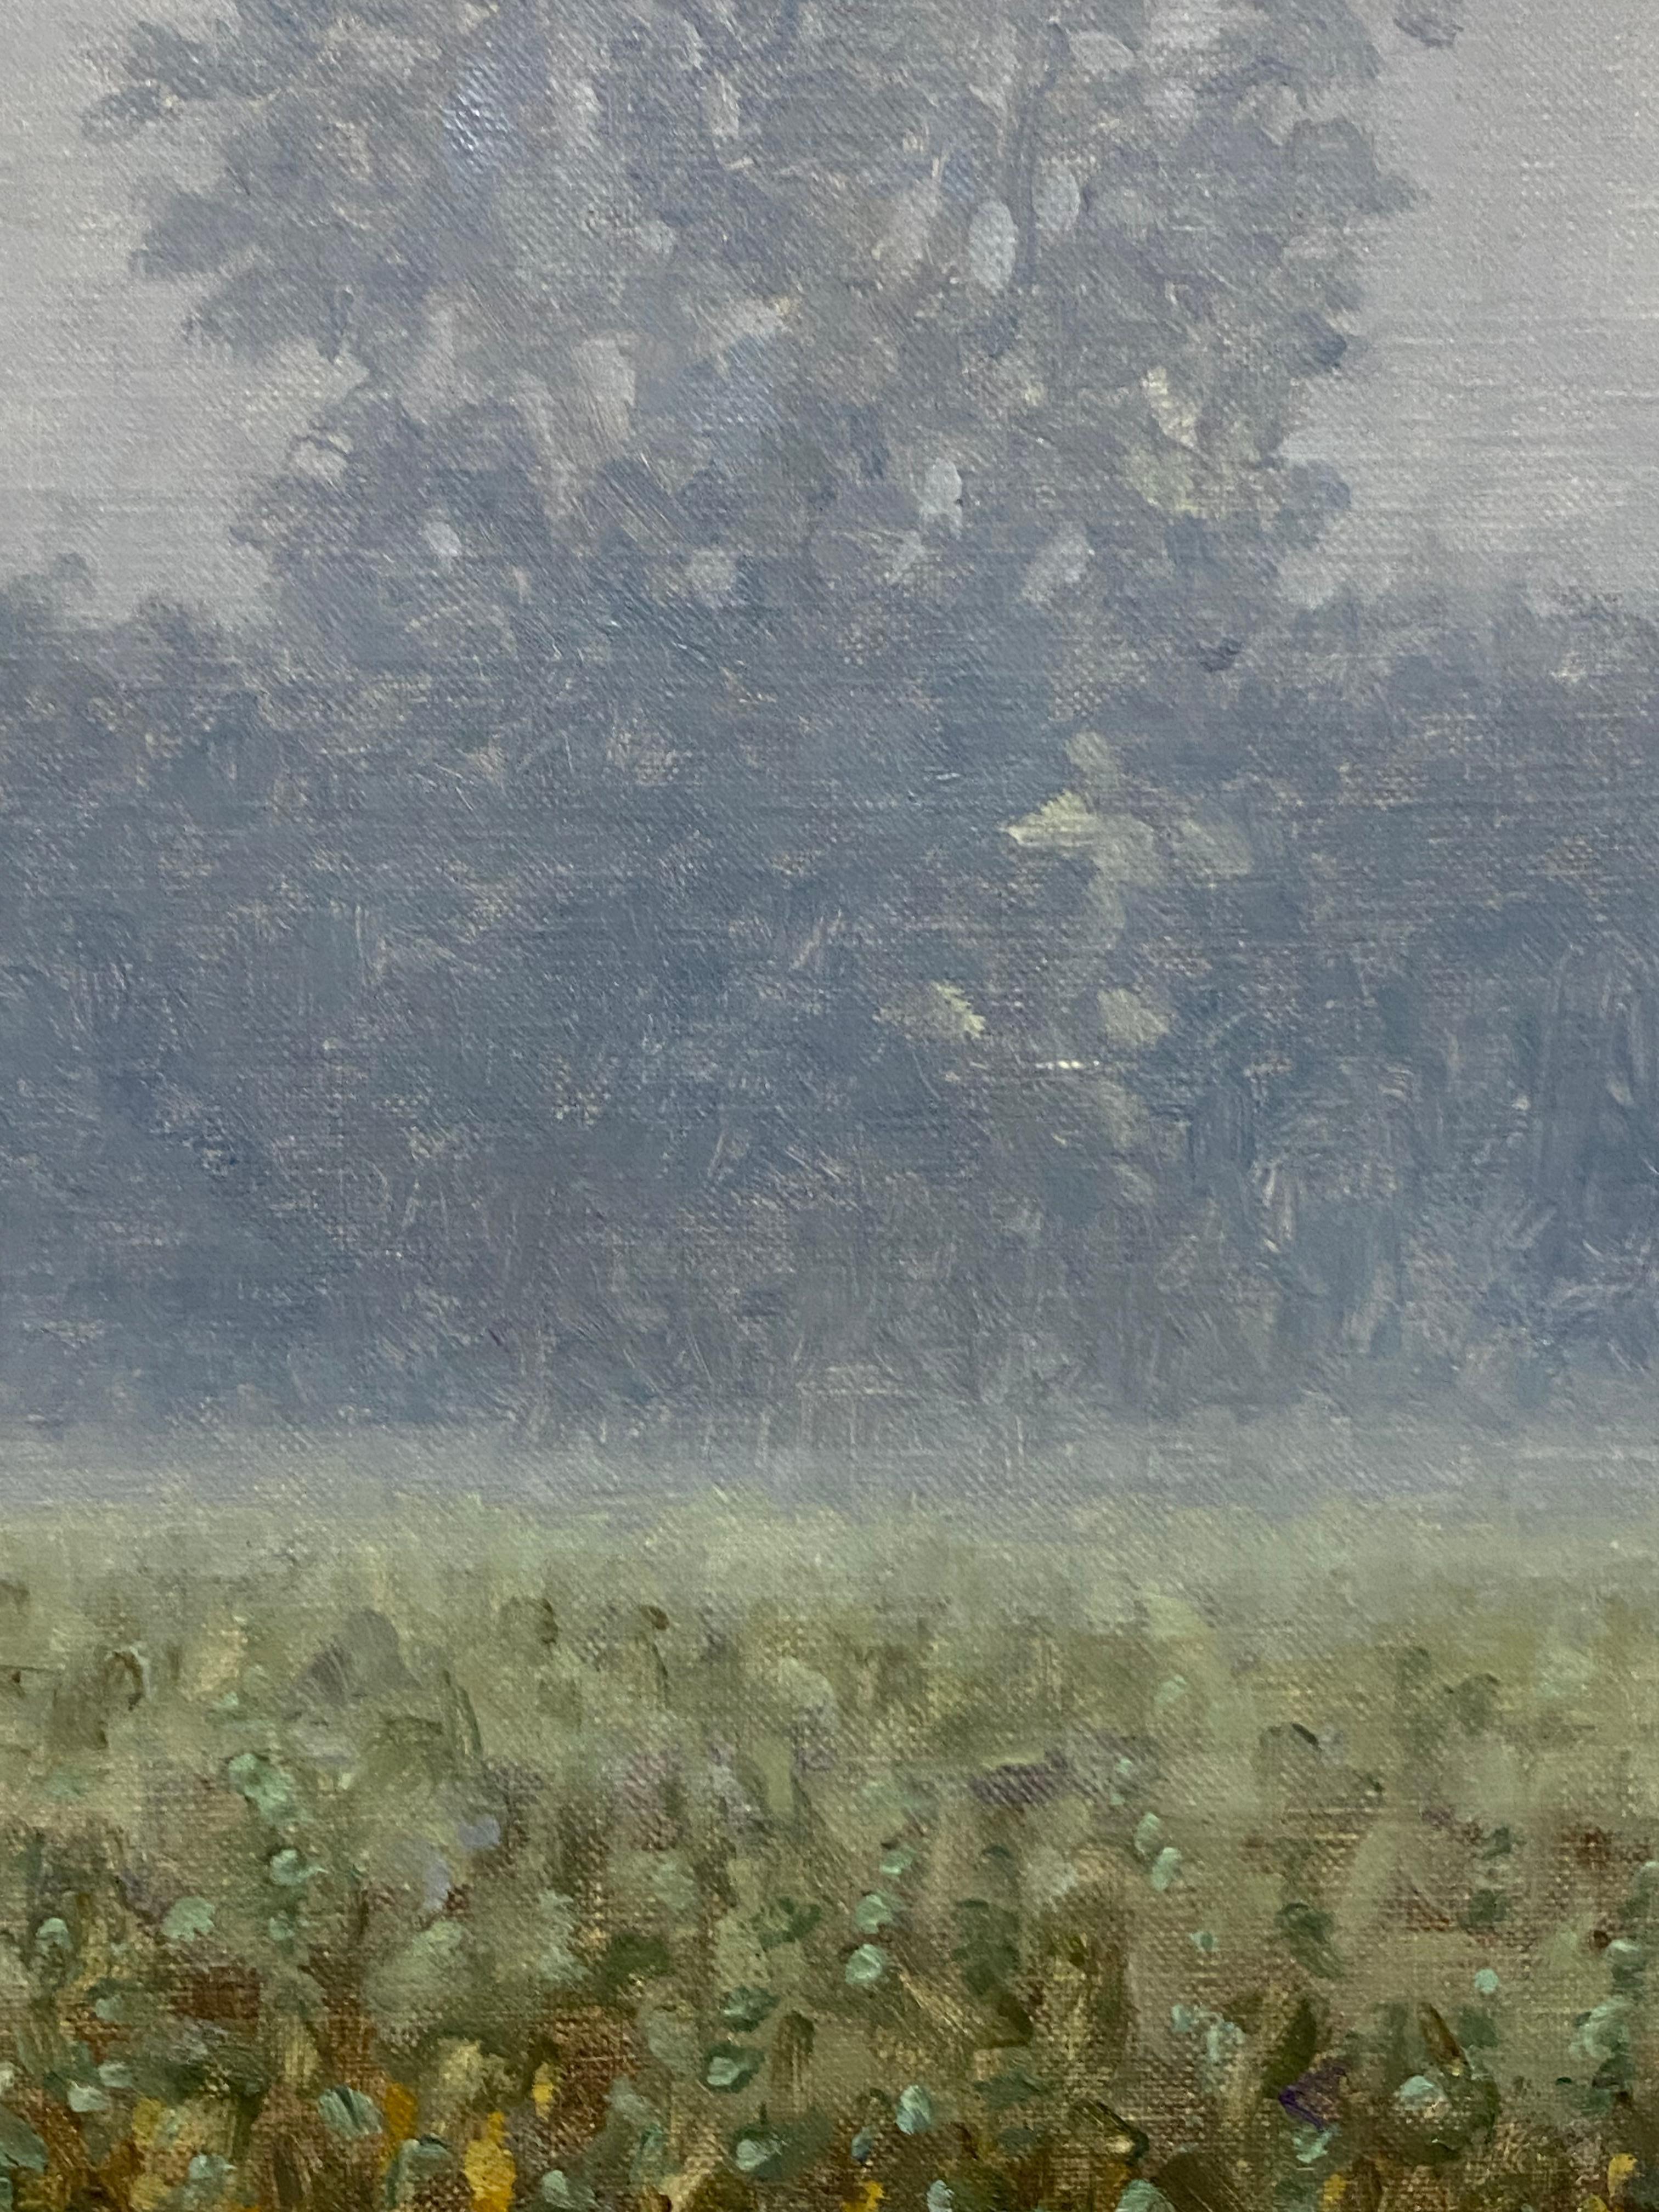 Field Painting August 31 2021, Landscape in Fog, Trees, Green, Ochre Grass For Sale 1